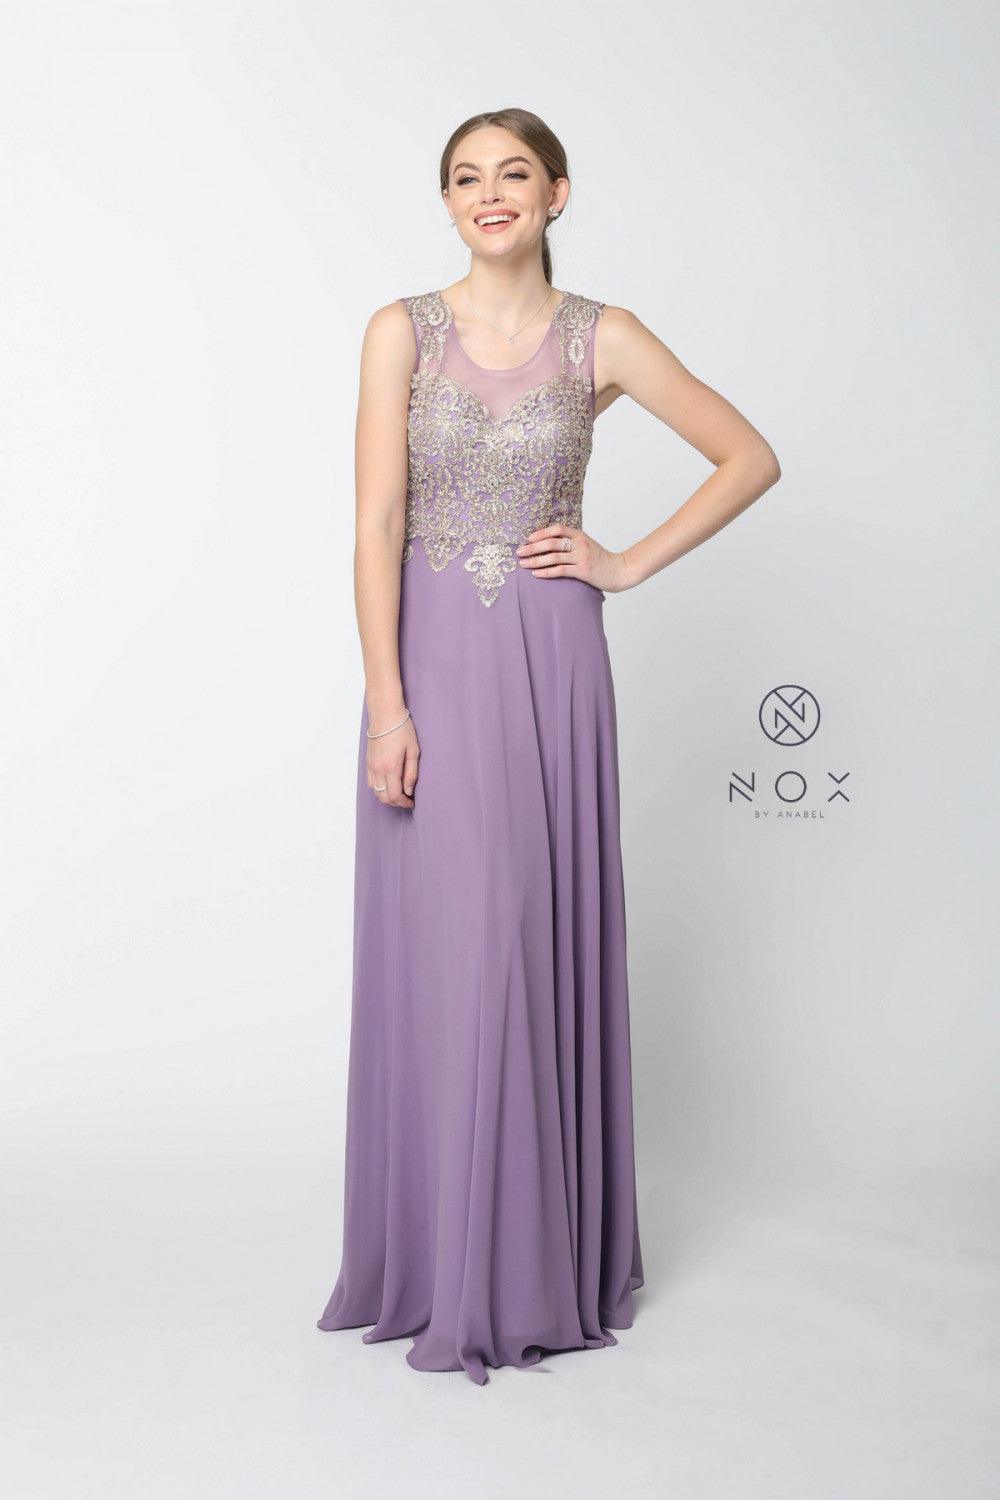 Long Sleeveless Prom Dress Evening Gown - The Dress Outlet Nox Anabel